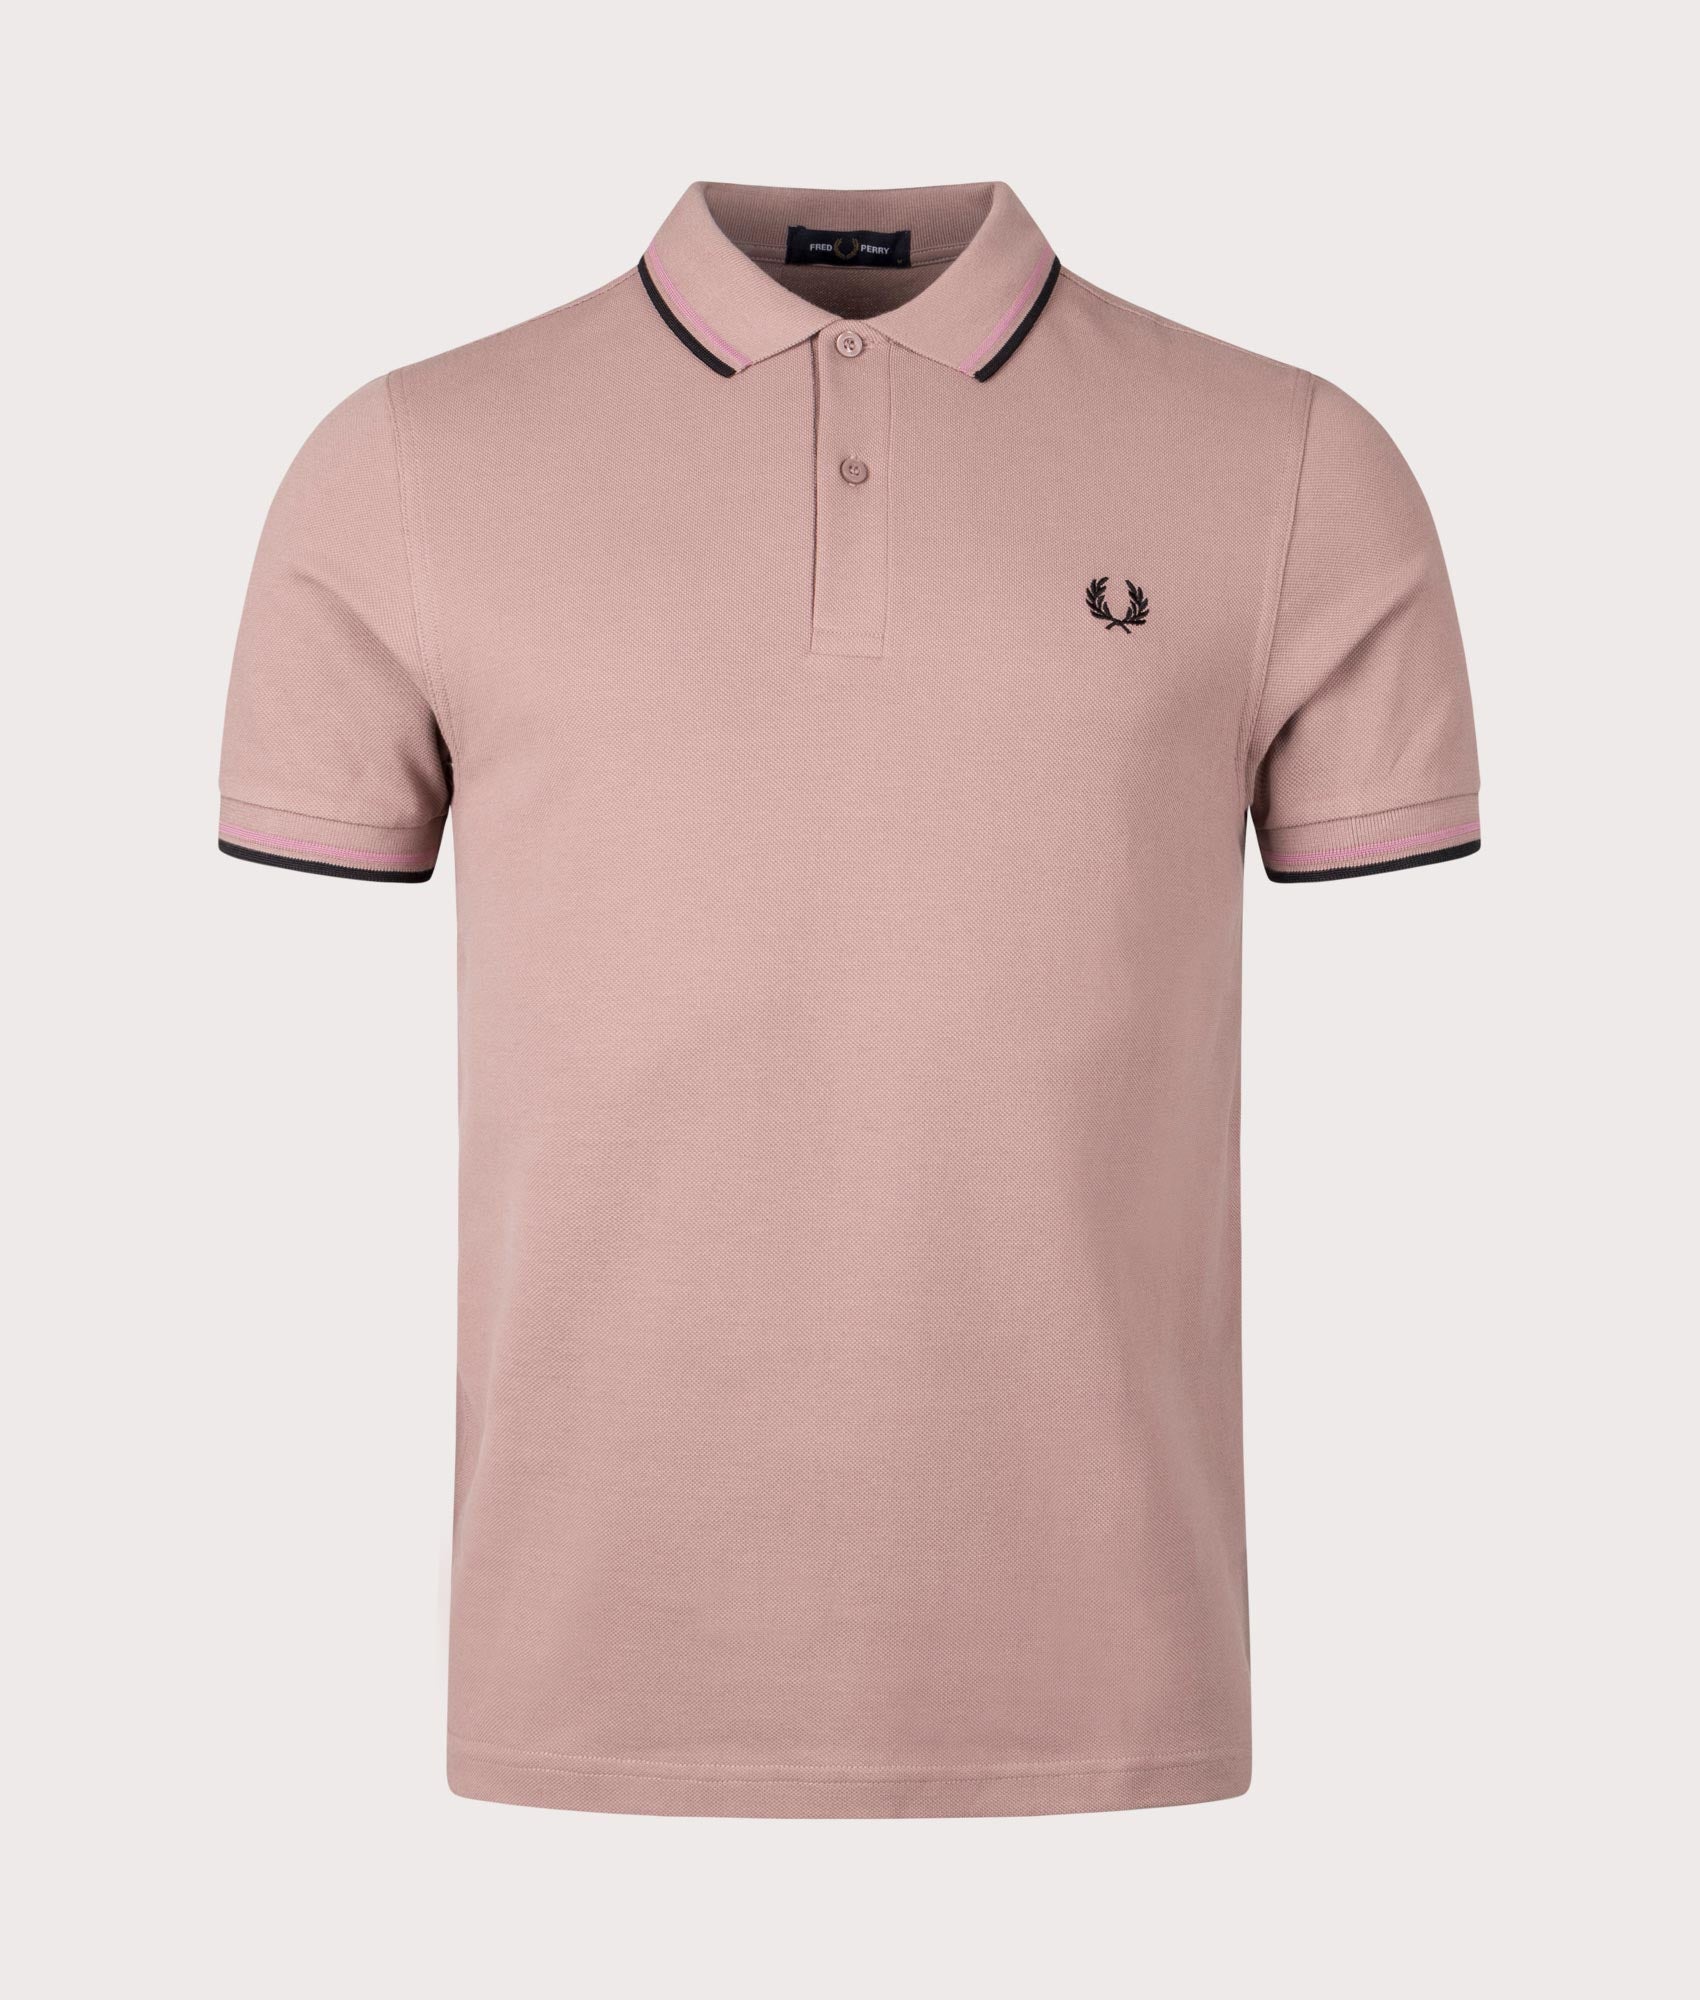 Fred Perry Mens Twin Tipped Polo Shirt - Colour: U89 Dark Pink/Dusty Rose/Black - Size: Medium